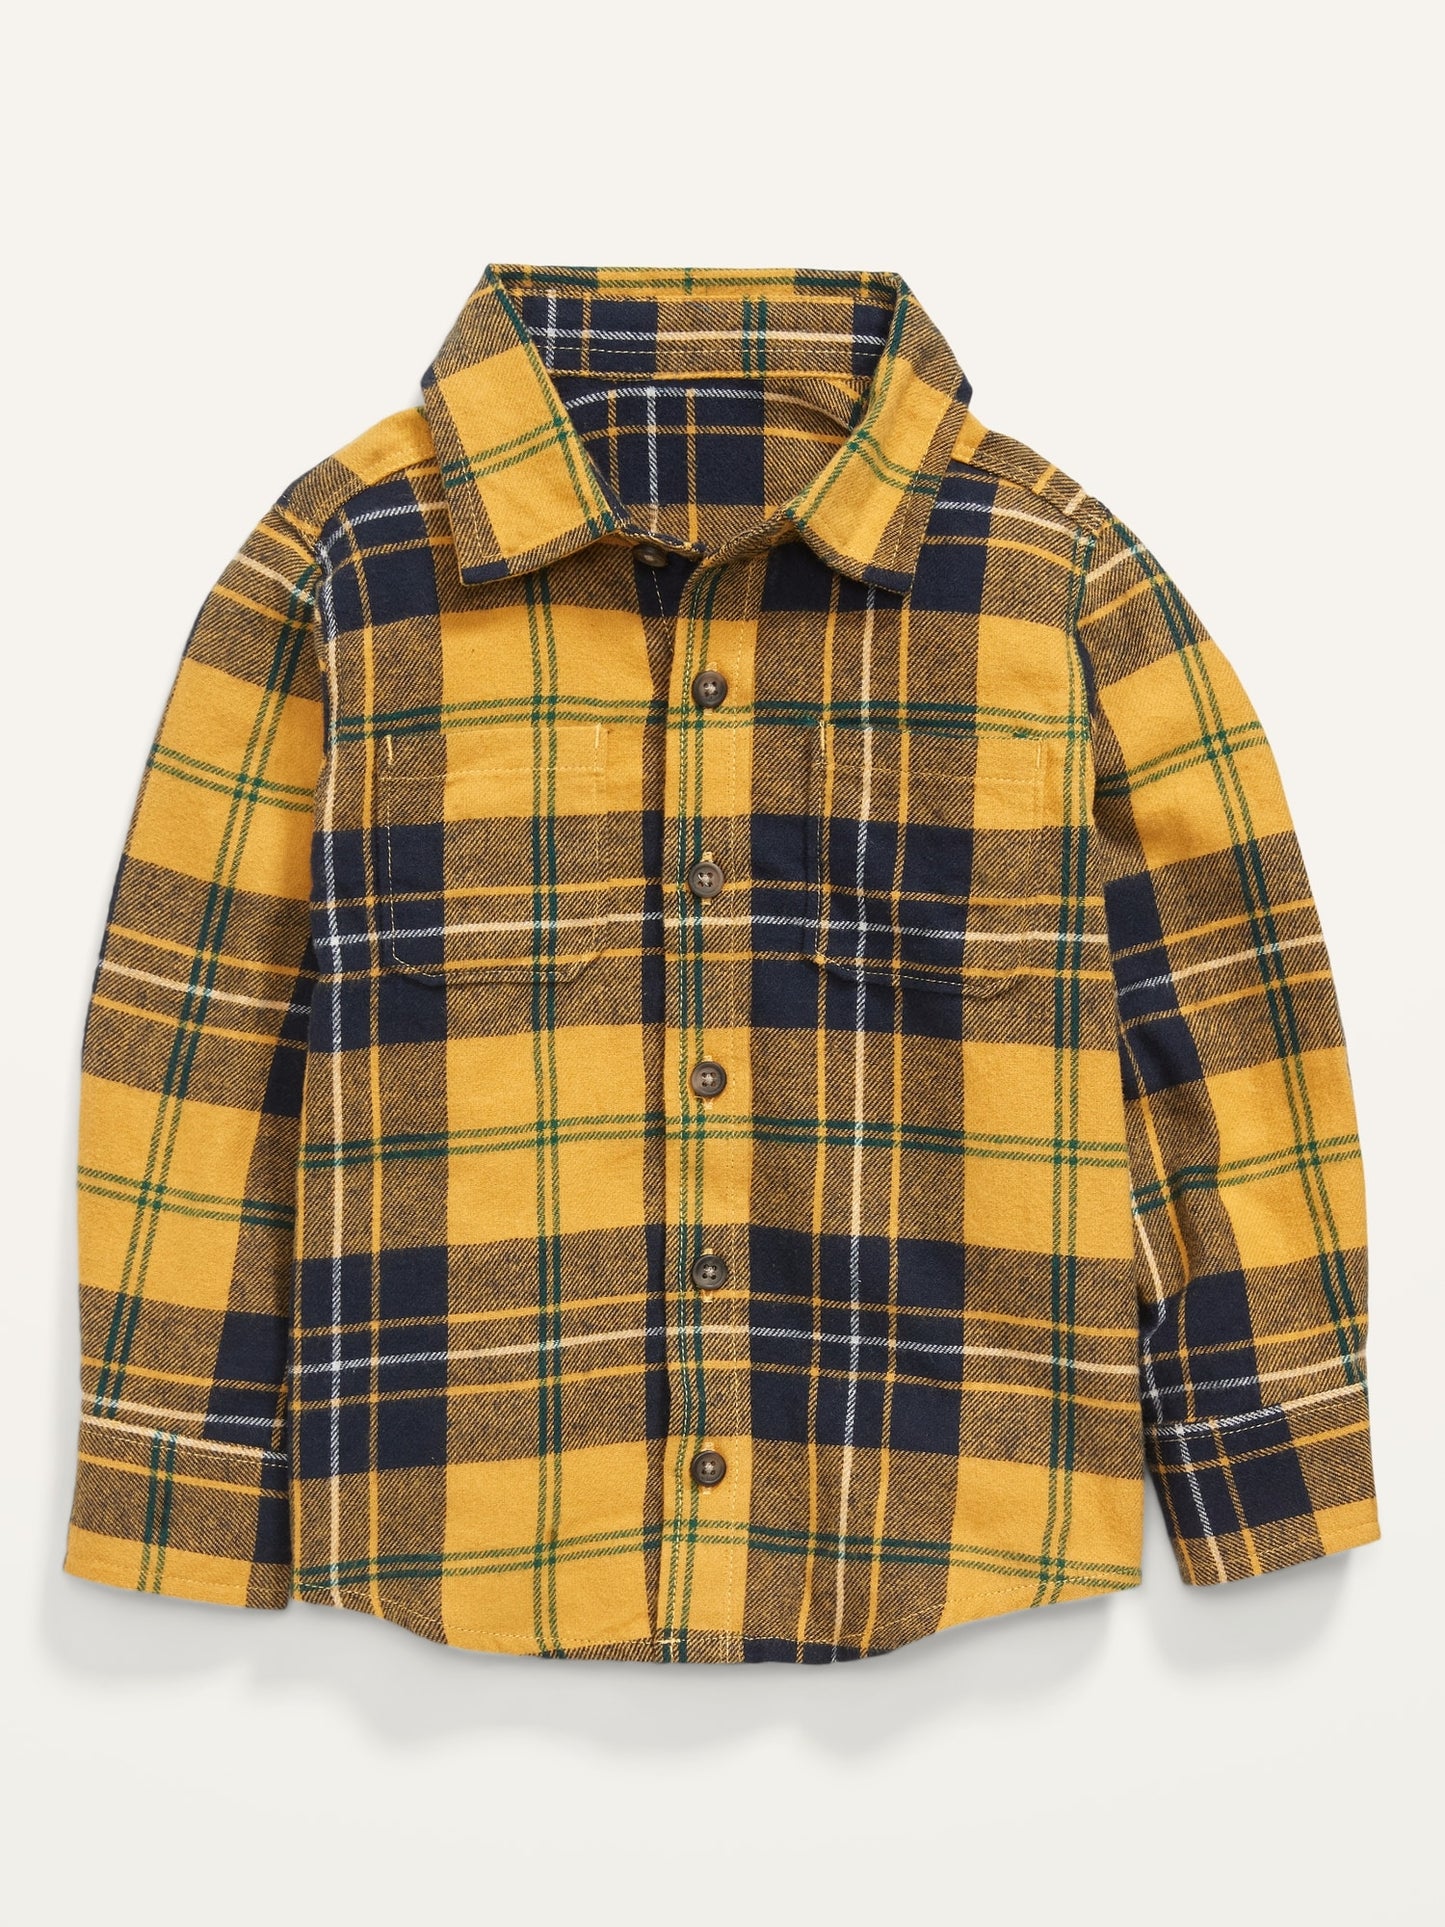 ON Unisex Plaid Flannel Long-Sleeve Shirt For Toddler - Yellow Plaid